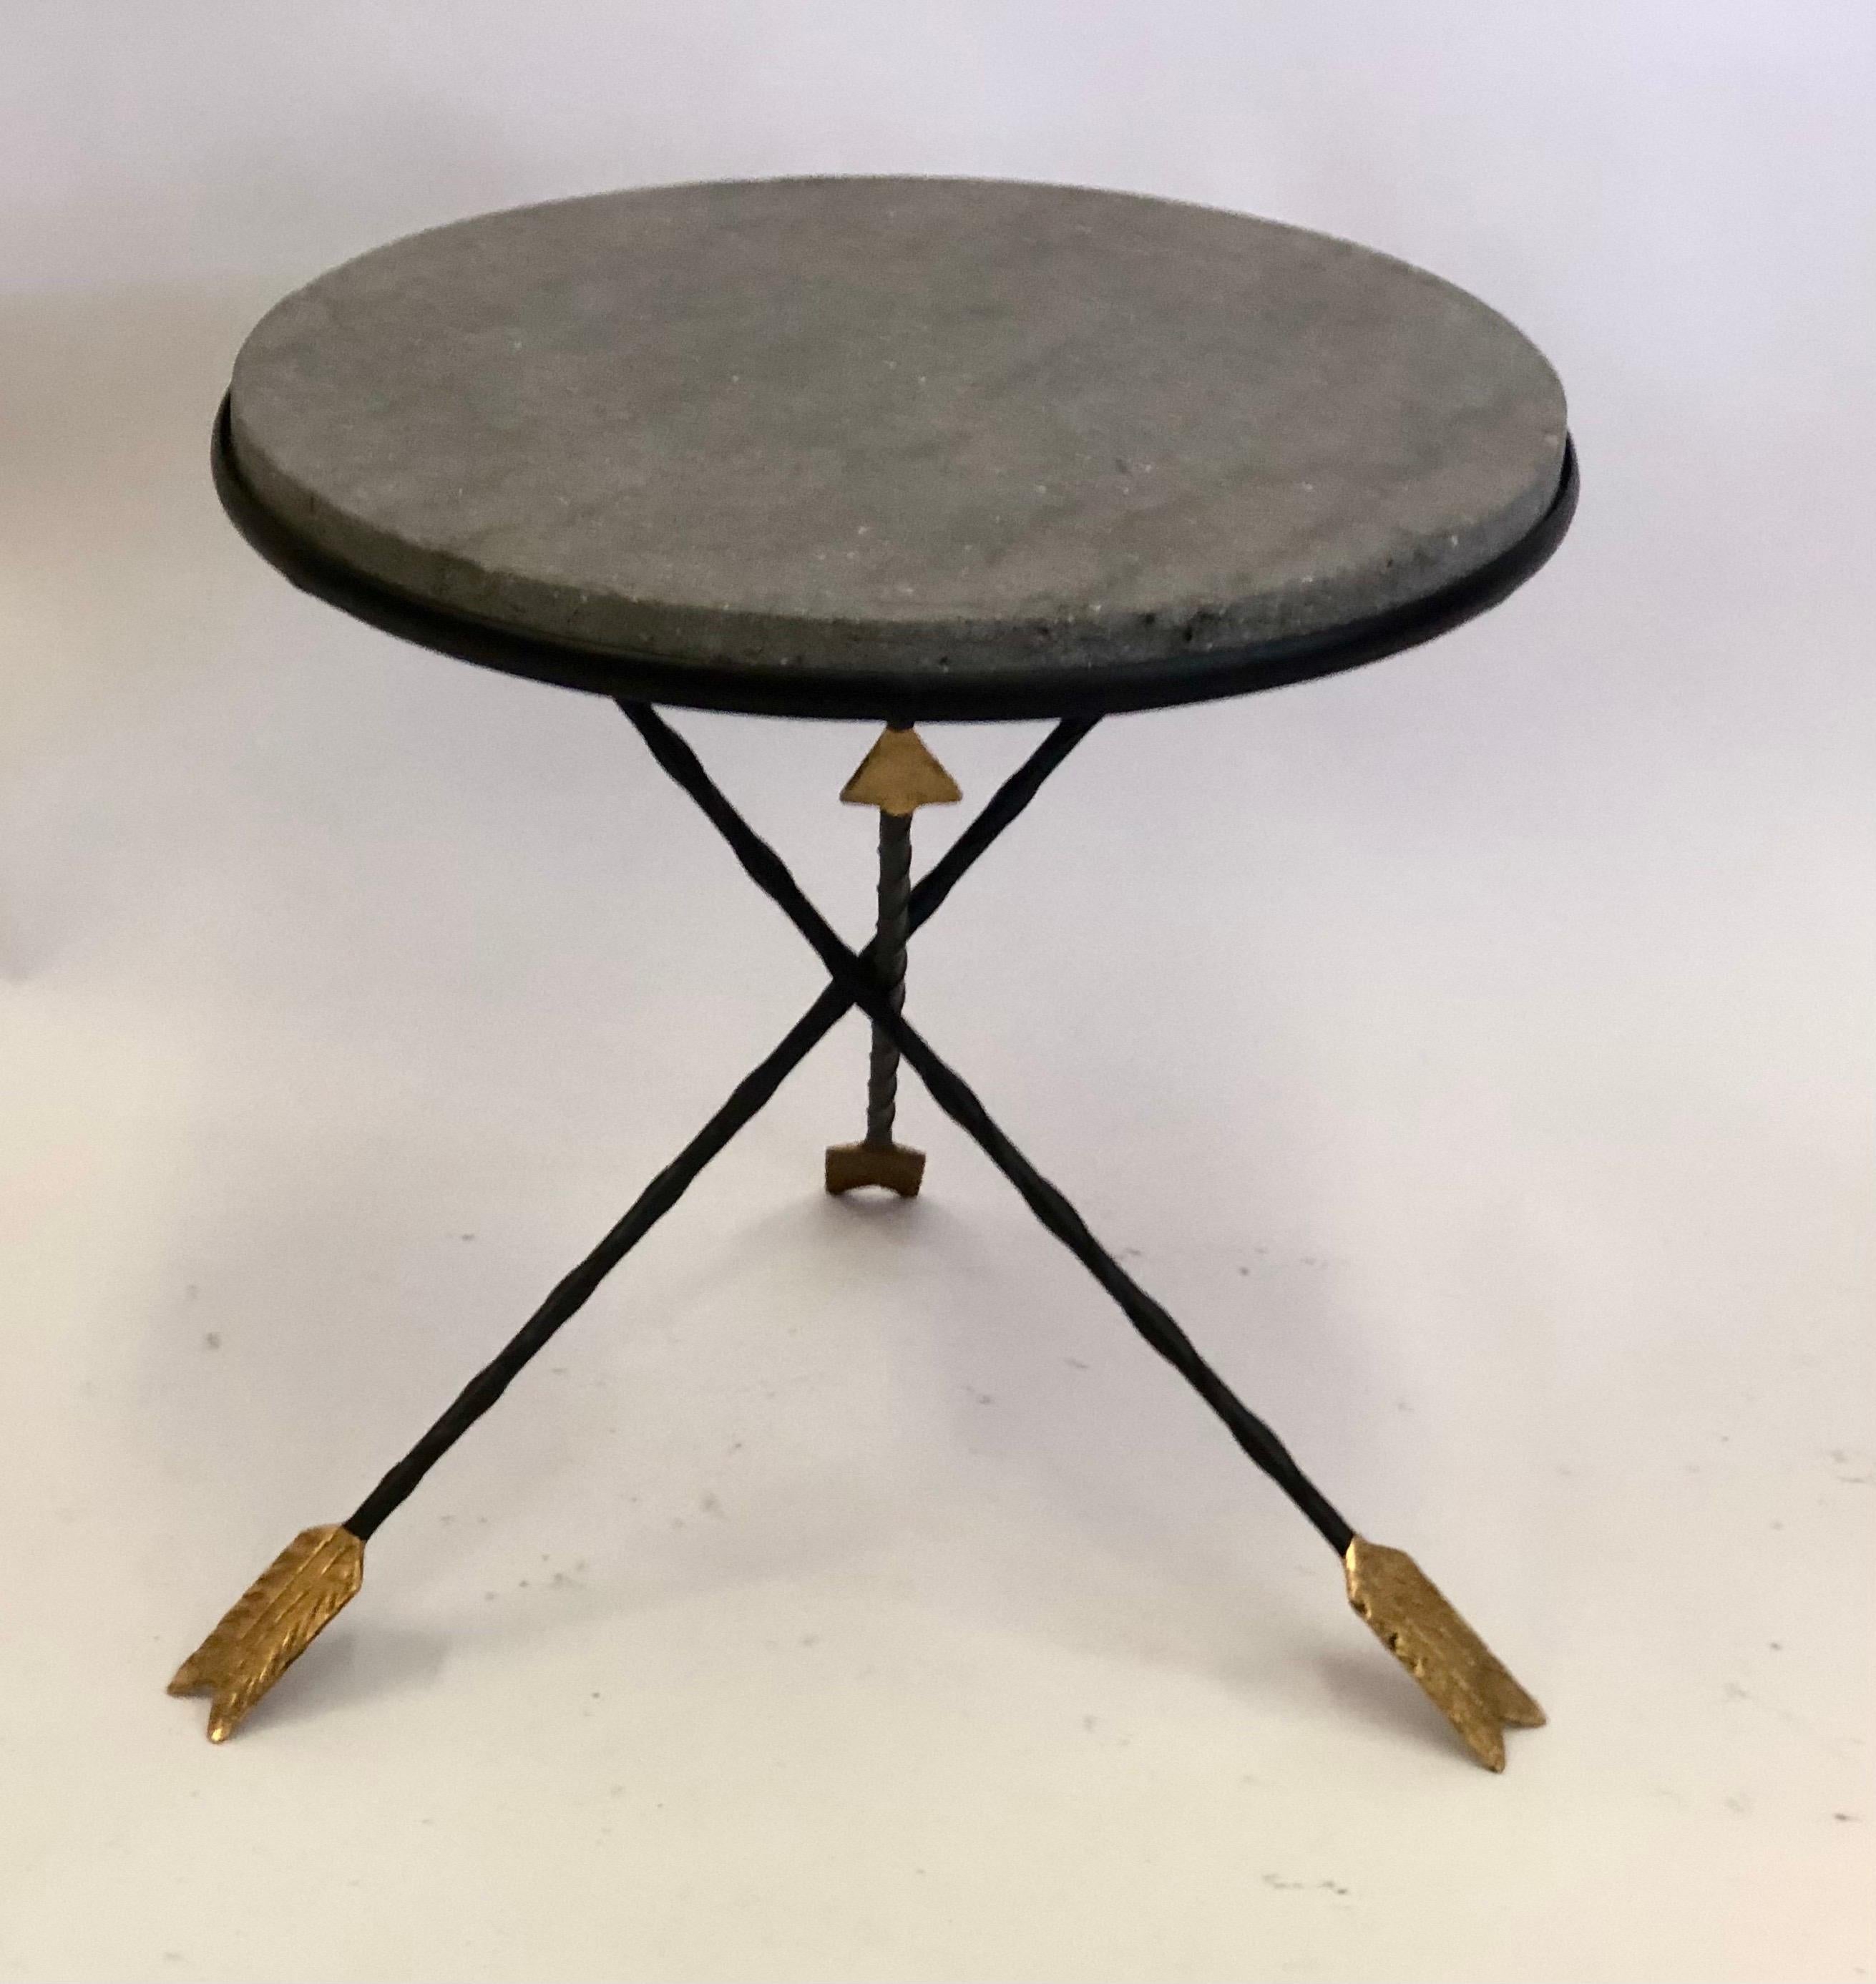 French Mid-Century Modern neoclassical partially gilt wrought iron gueridon or side / end table by Maison Jansen. A dramatic piece that features a top of rich, natural basalt stone inset into a tripod wrought iron base supported by 3 partially gilt